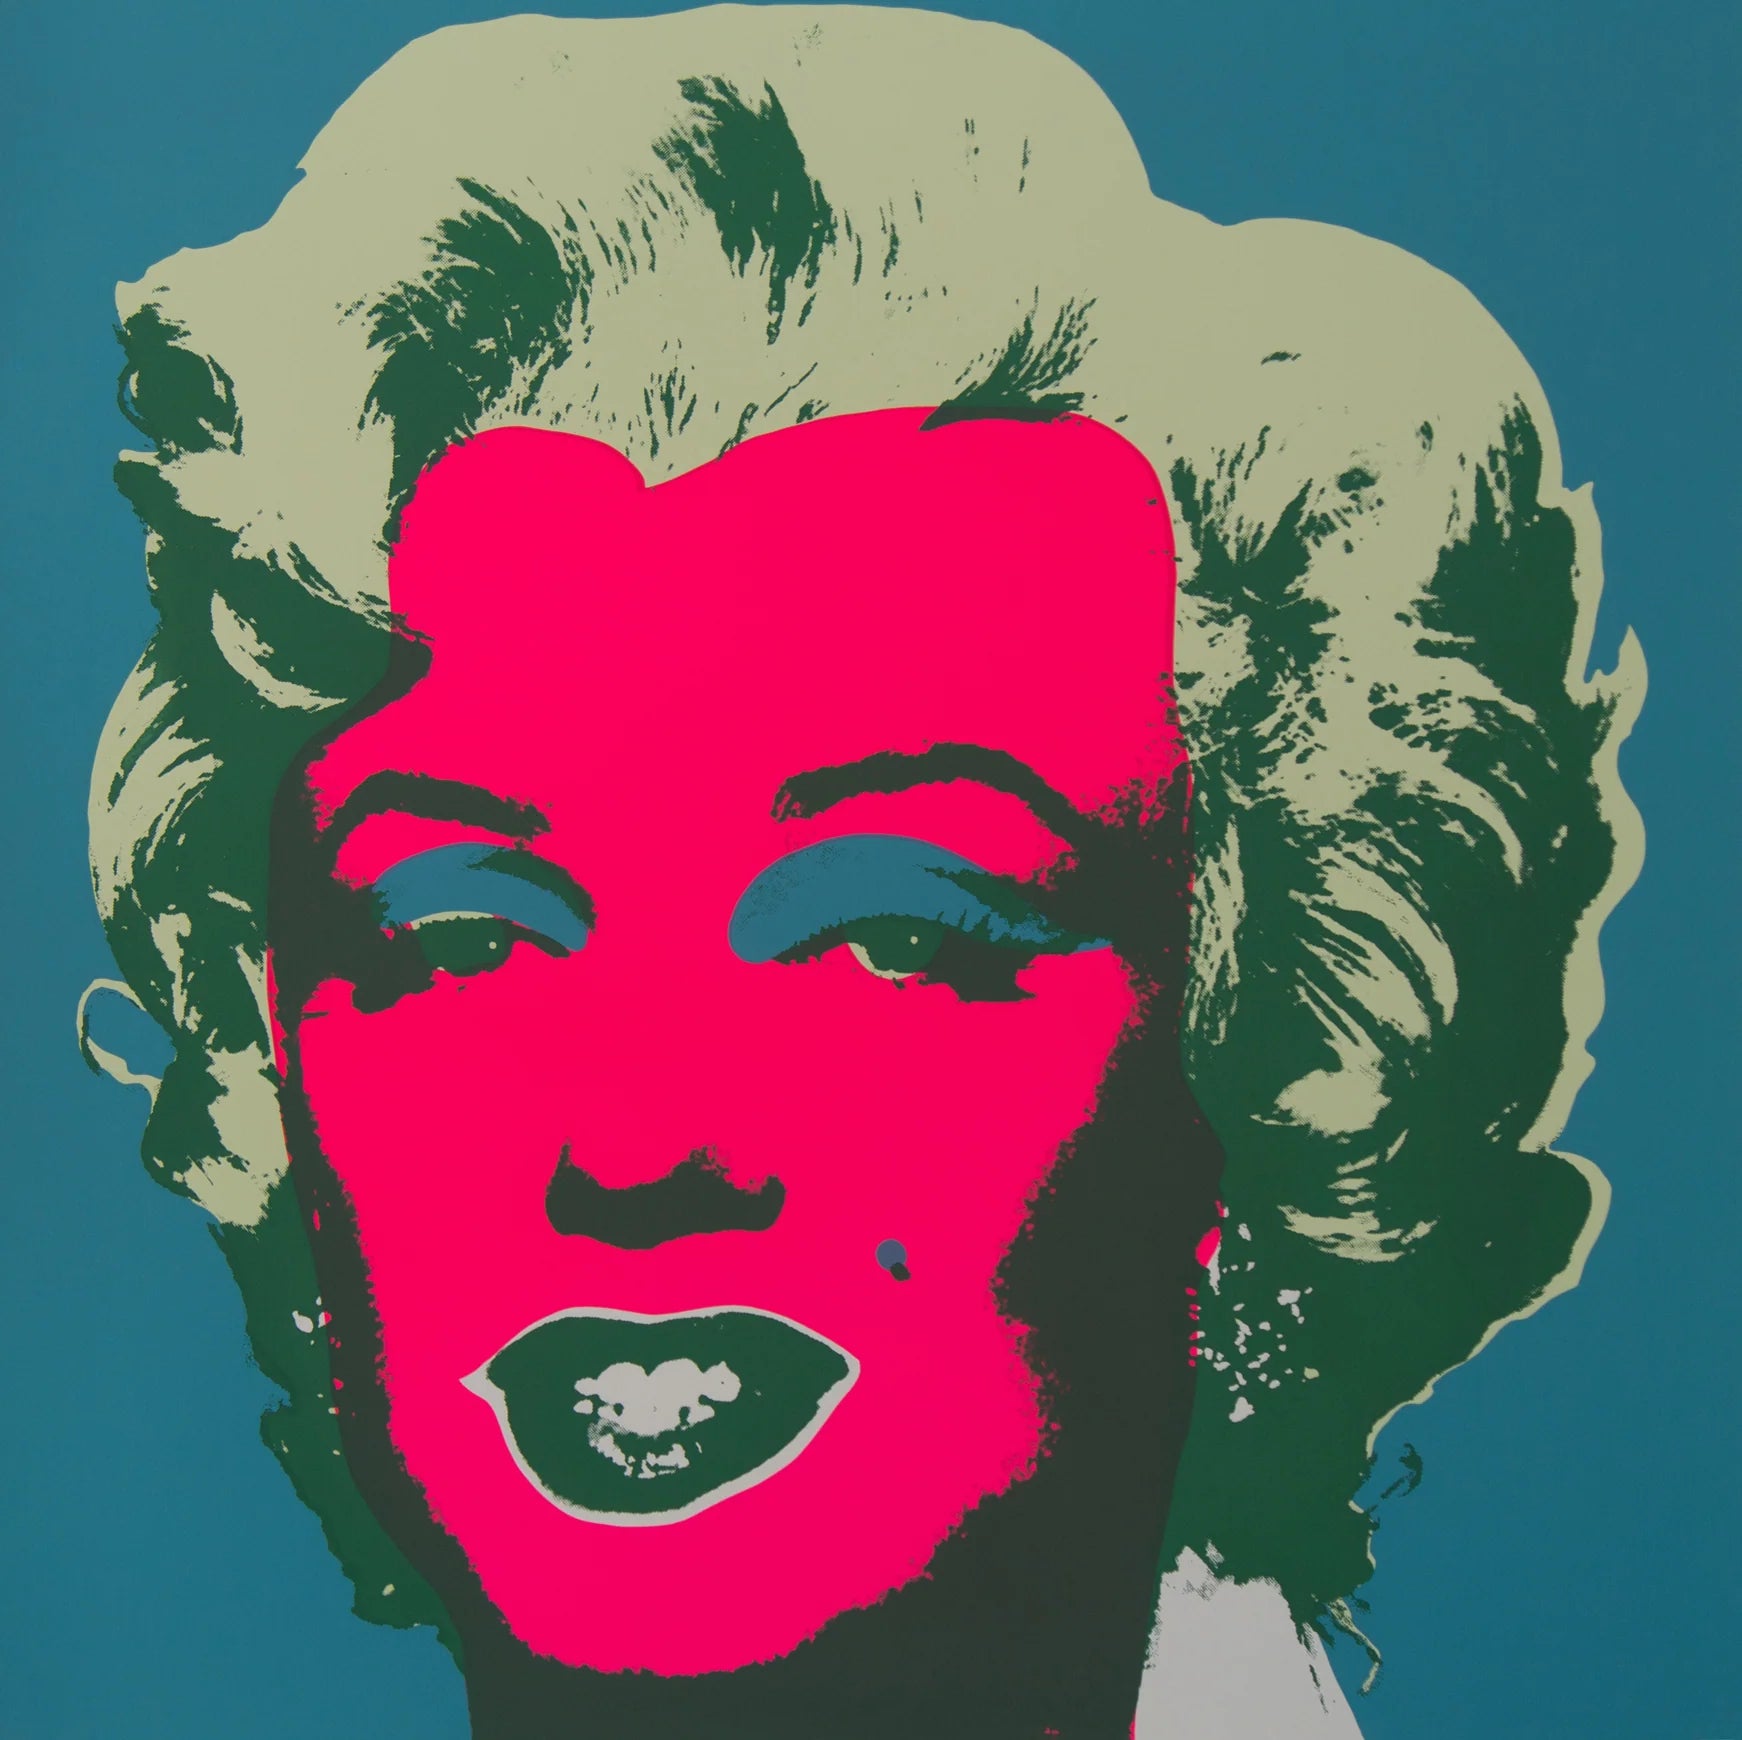 this is an image of a sunday b morning print after andy warhol titled 'marilyn 11:30'. the artwork features a screenprint of marilyn monroe's face on a teal background with a fuchsia face and sage green hair. this is a sunday b morning print for sale